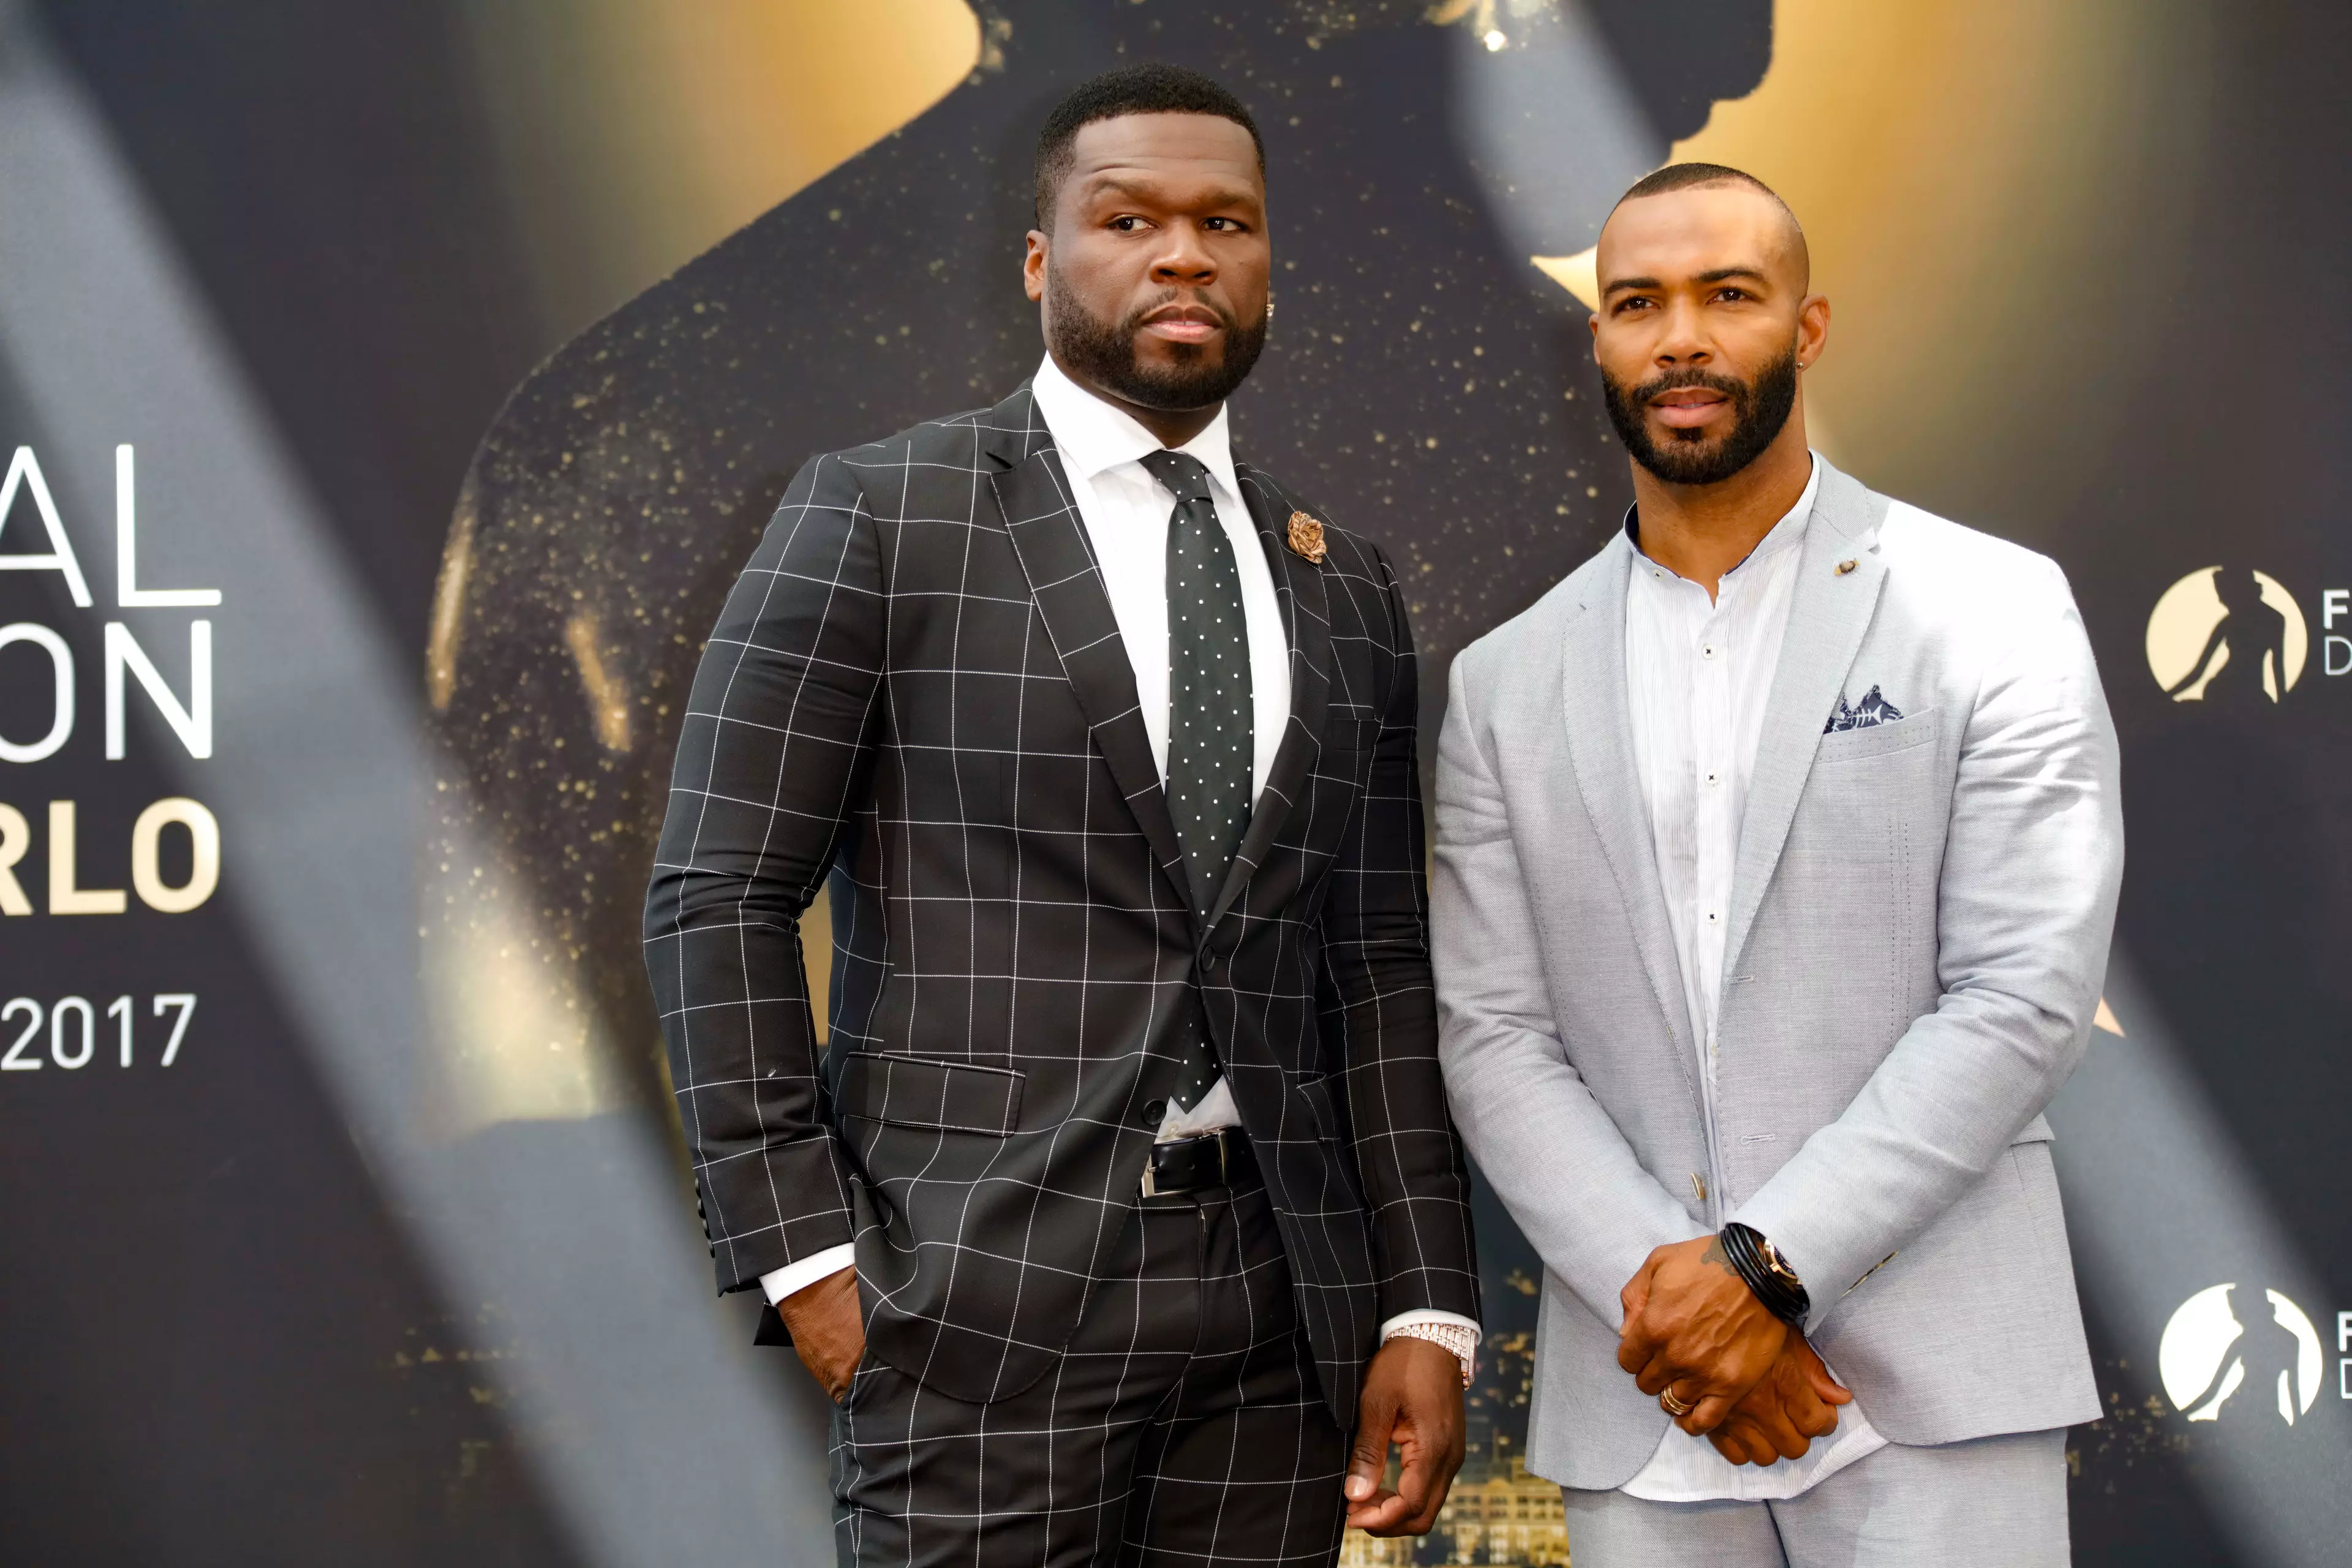 50 Cent with Omari Hardwick, who is the star of TV show Power